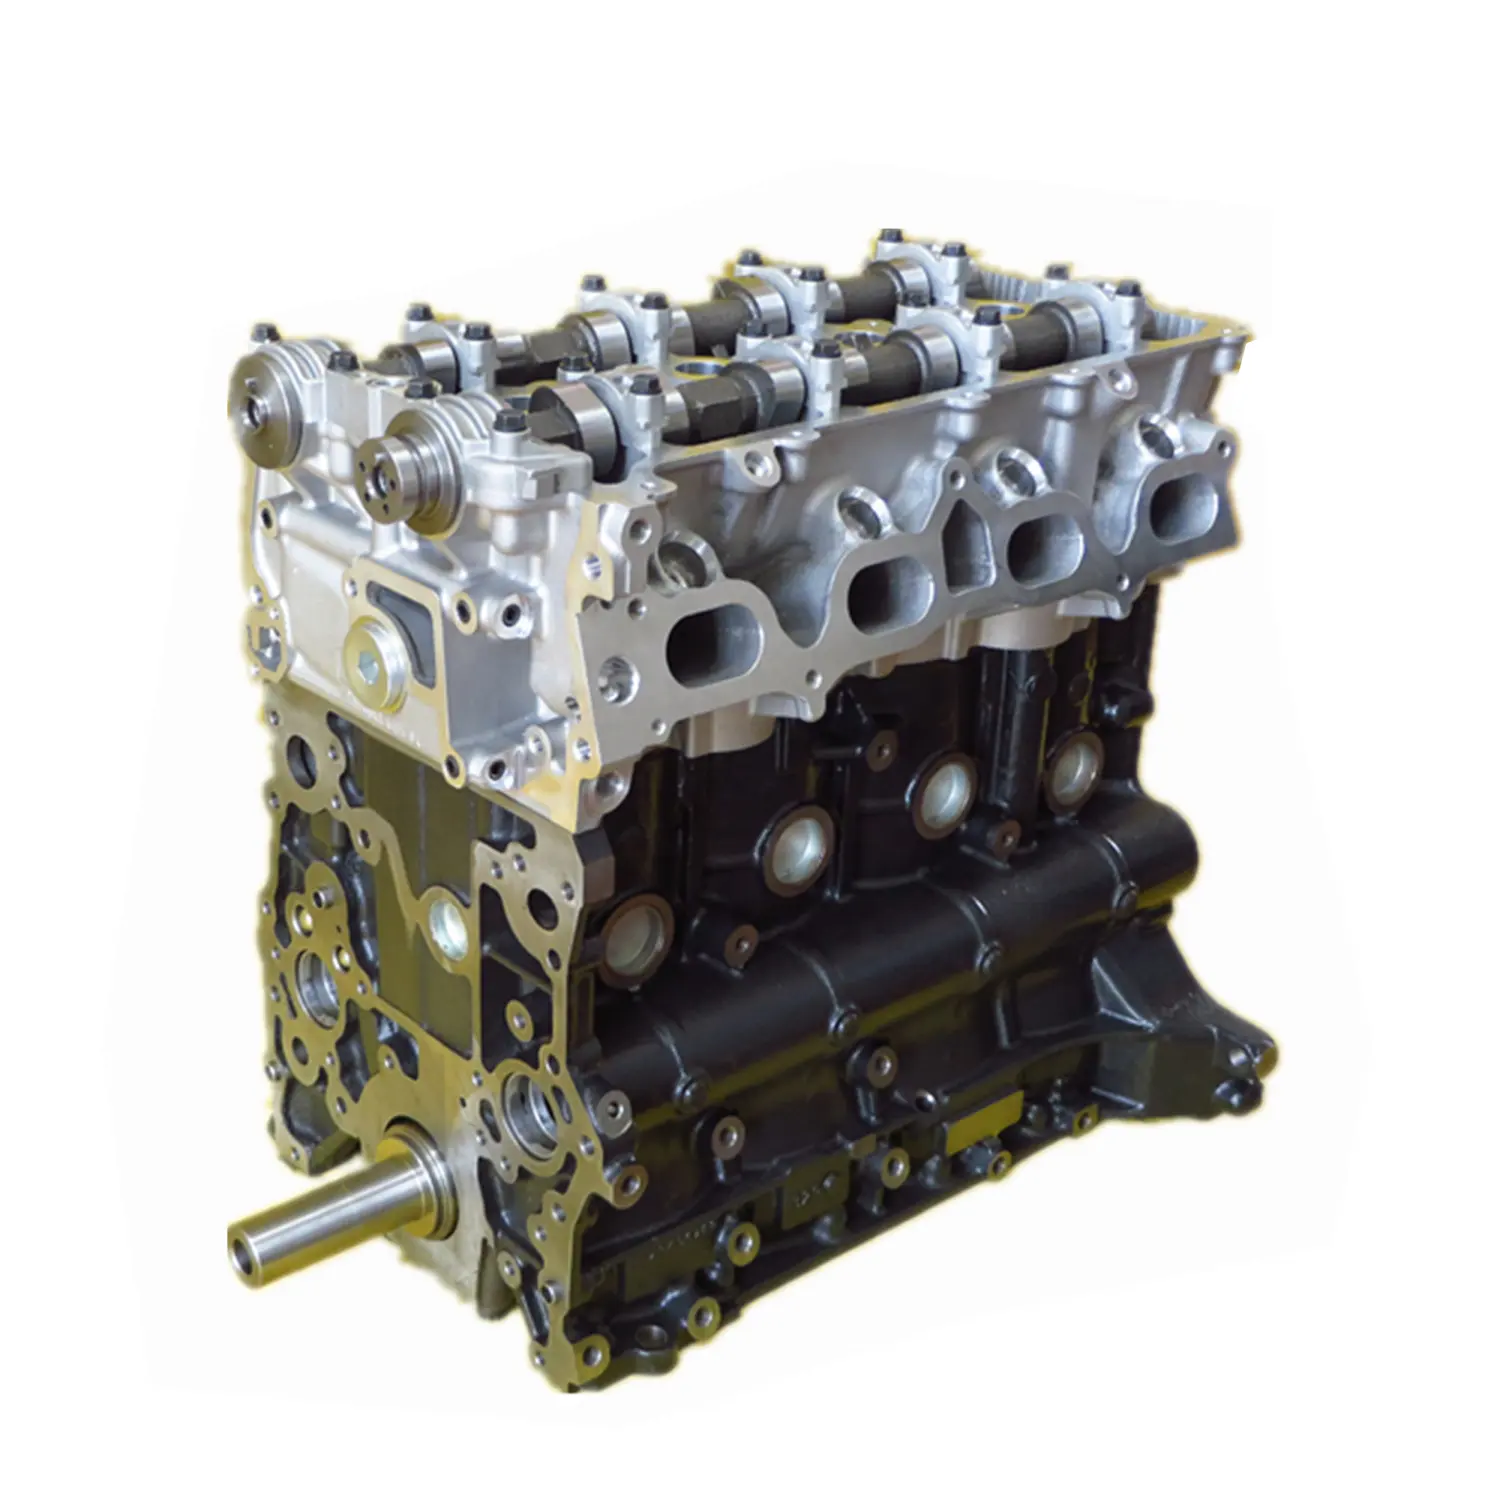 Brand new 3L engine long block for Toyota hilux 2.8 D pickup 4x4